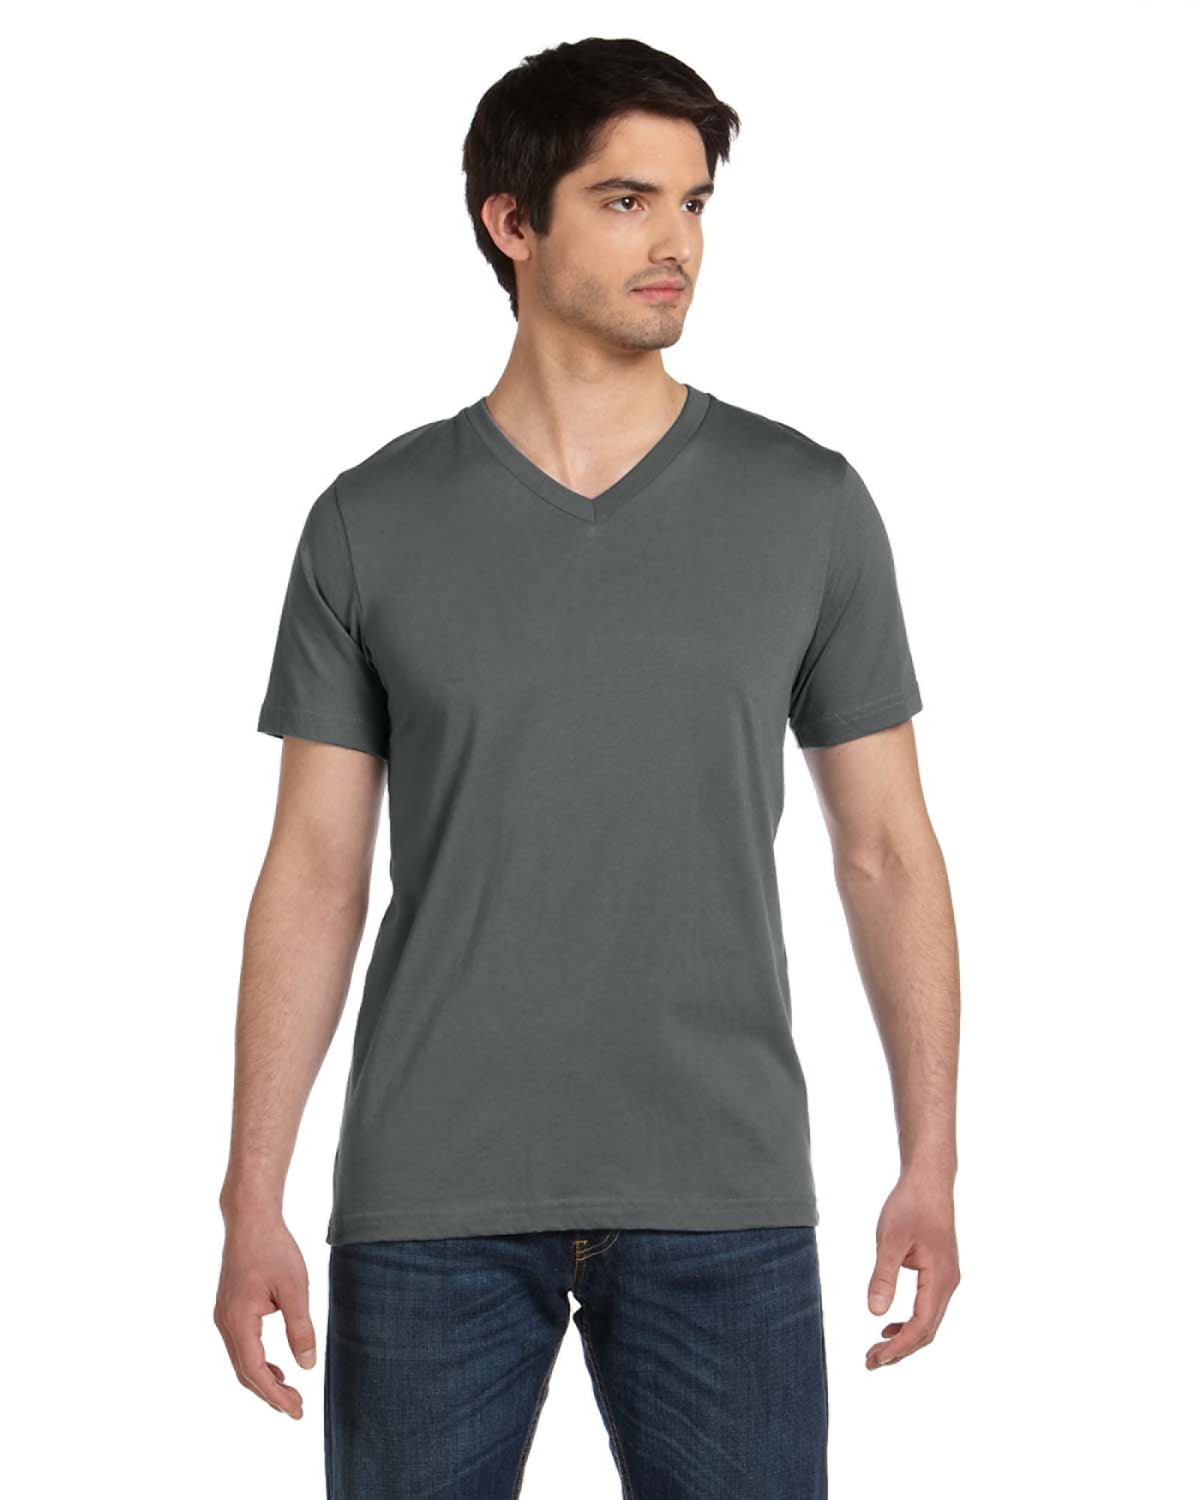 Bella + Canvas - 3005U Unisex Made in the USA Jersey Short-Sleeve V-Neck T-Shirt